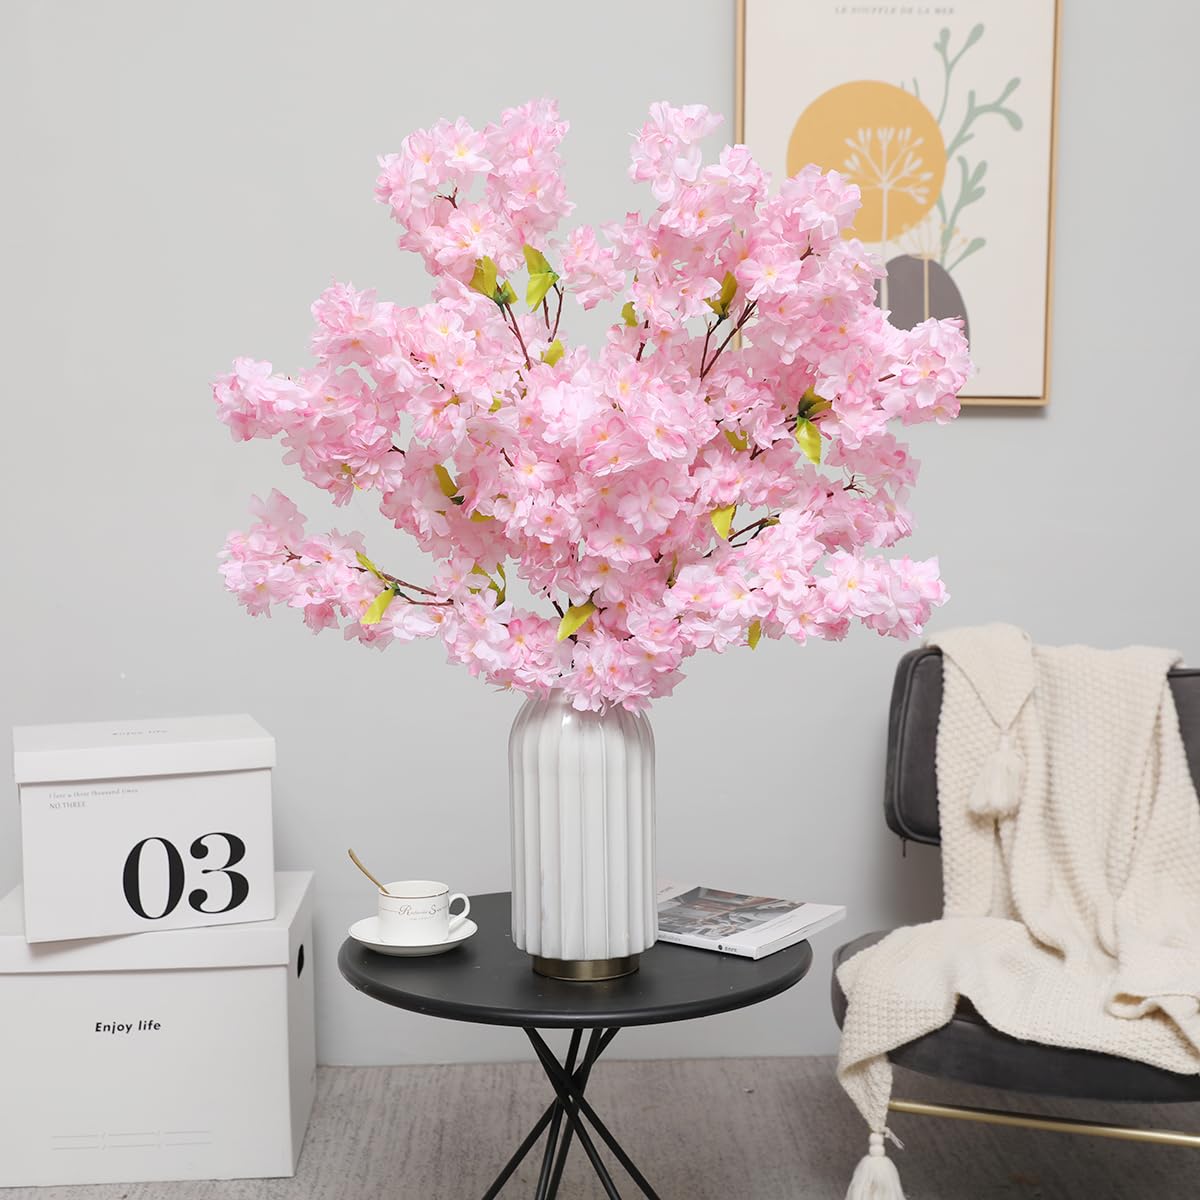 Tifuly 4Pcs Artificial Cherry Blossom Branches,42.52” Long Stems Fake Silk Flowers Bouquet Faux Cherry Flowers Arrangements for Party Office Home Wedding Decor（Pink）